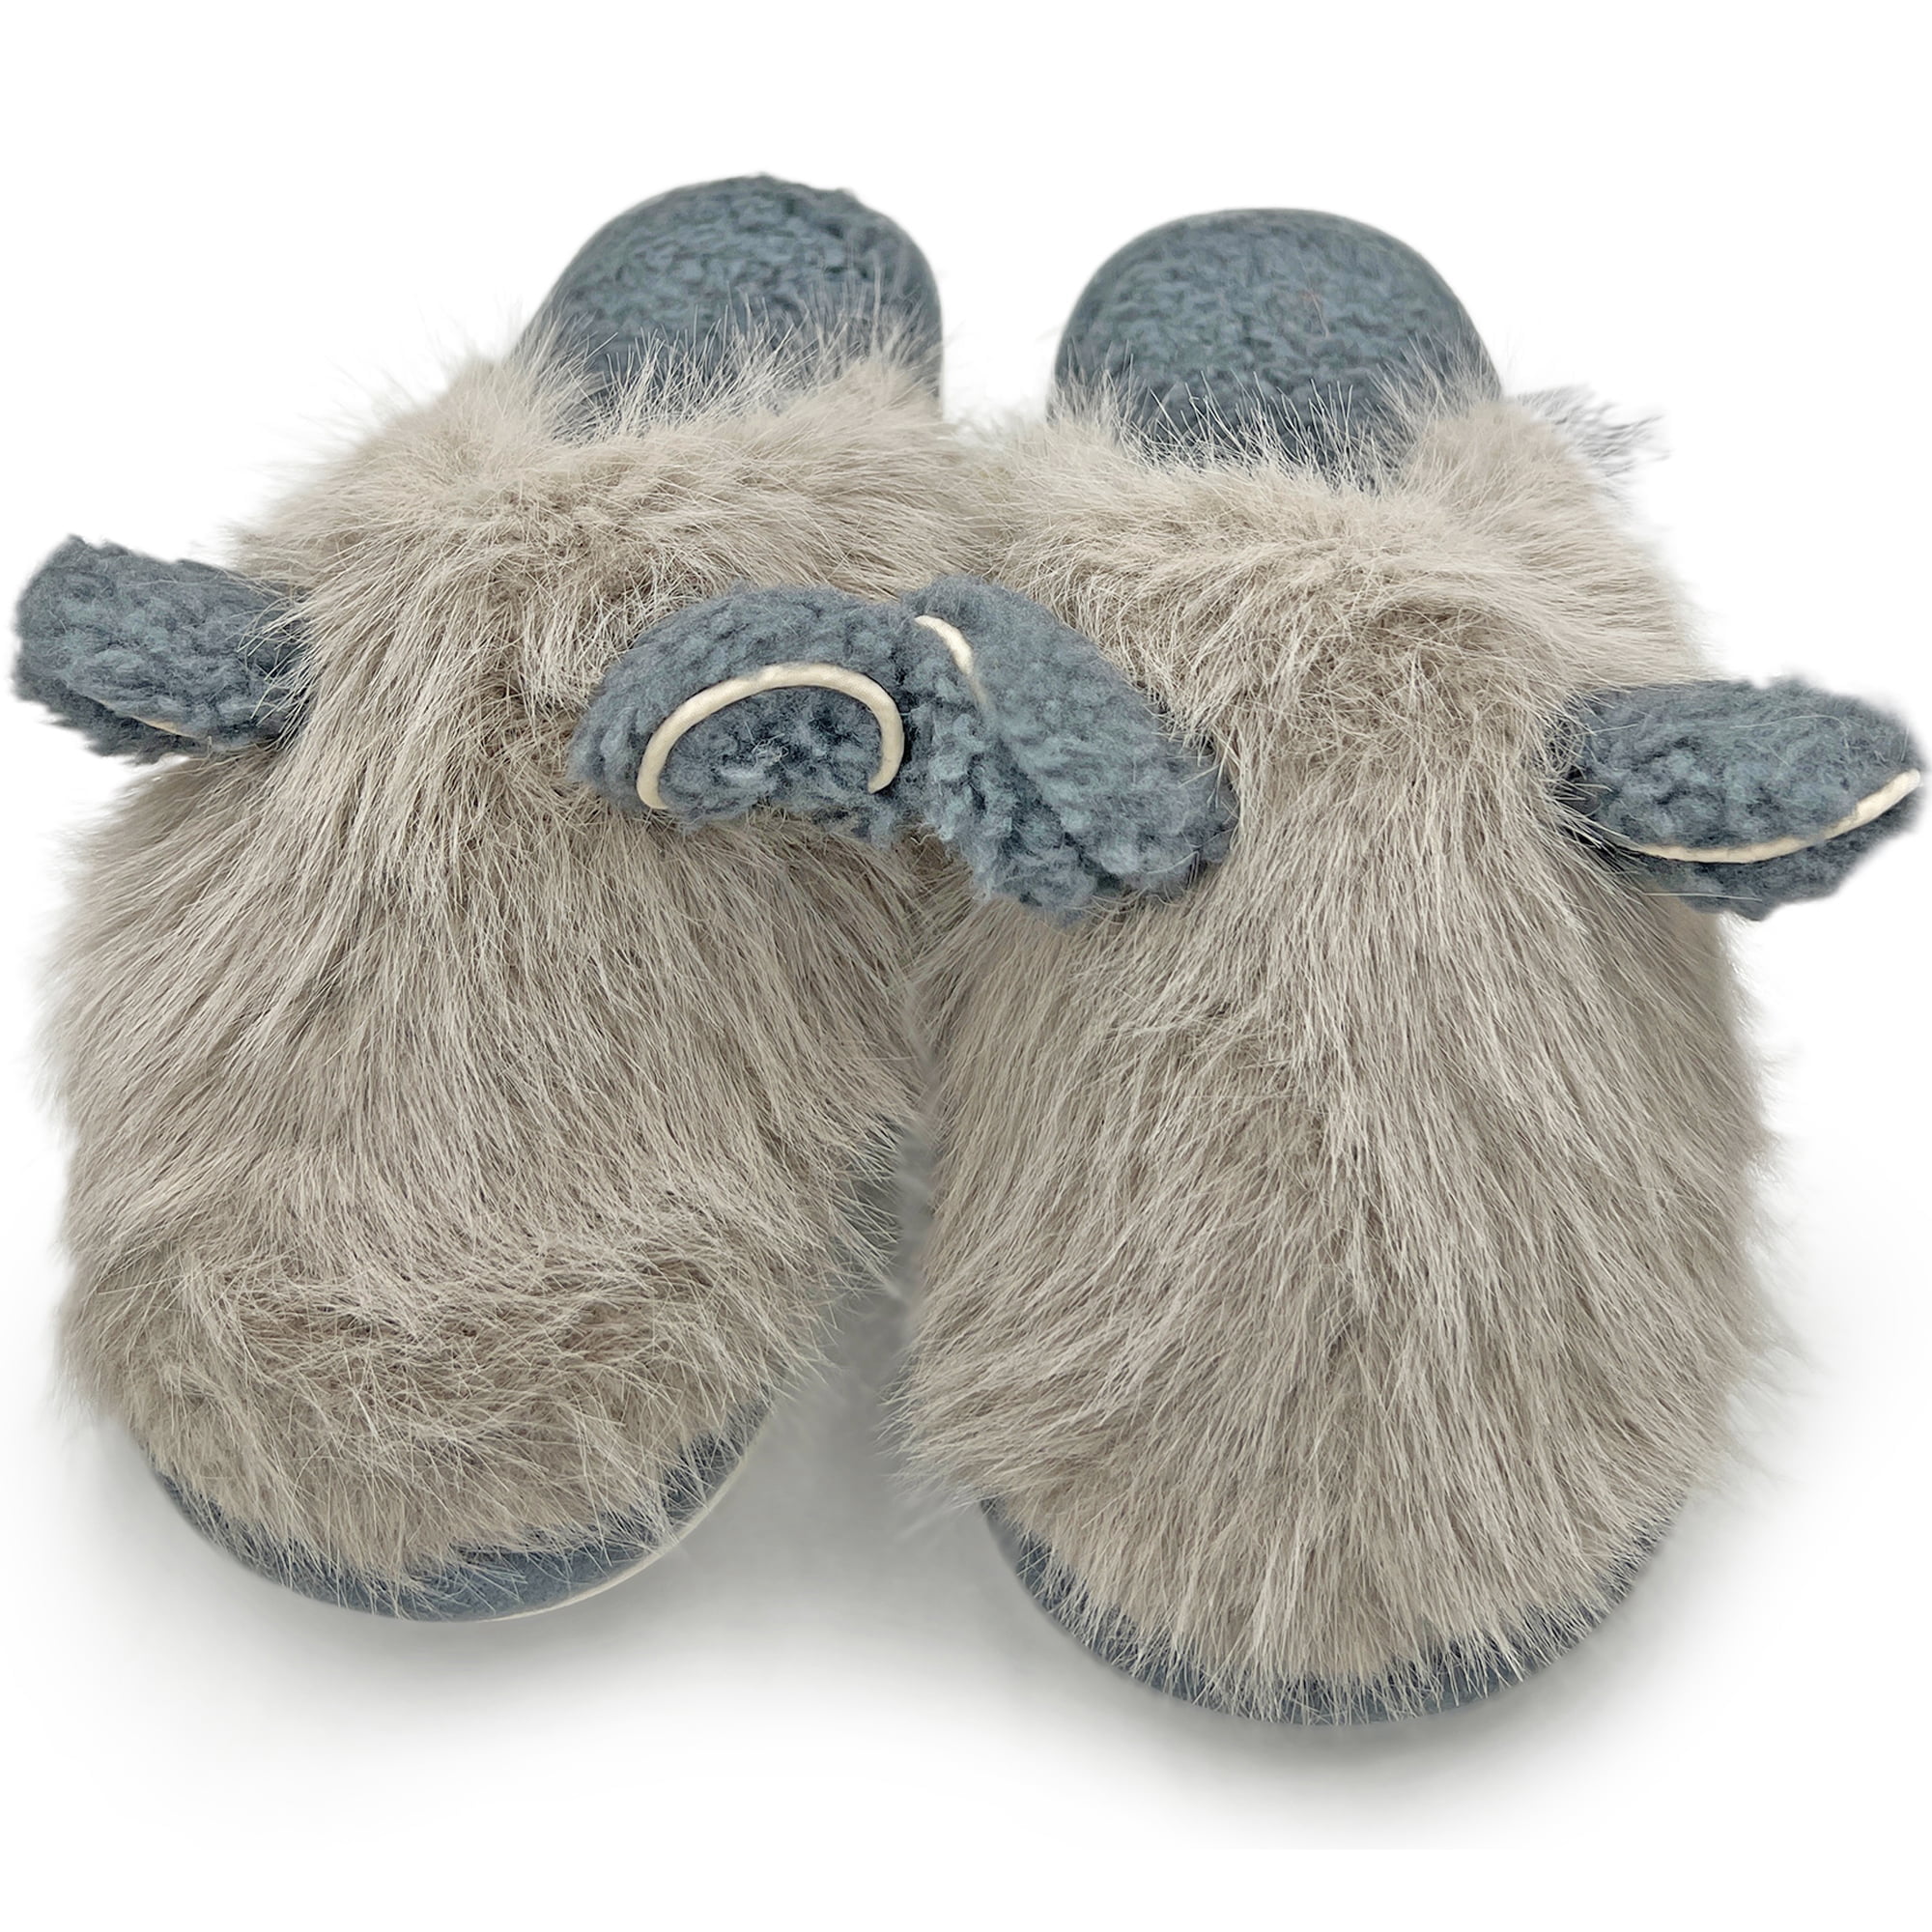 LAVRA Women's Fuzzy Slippers Warm Bedroom Faux Fur House Shoes ...